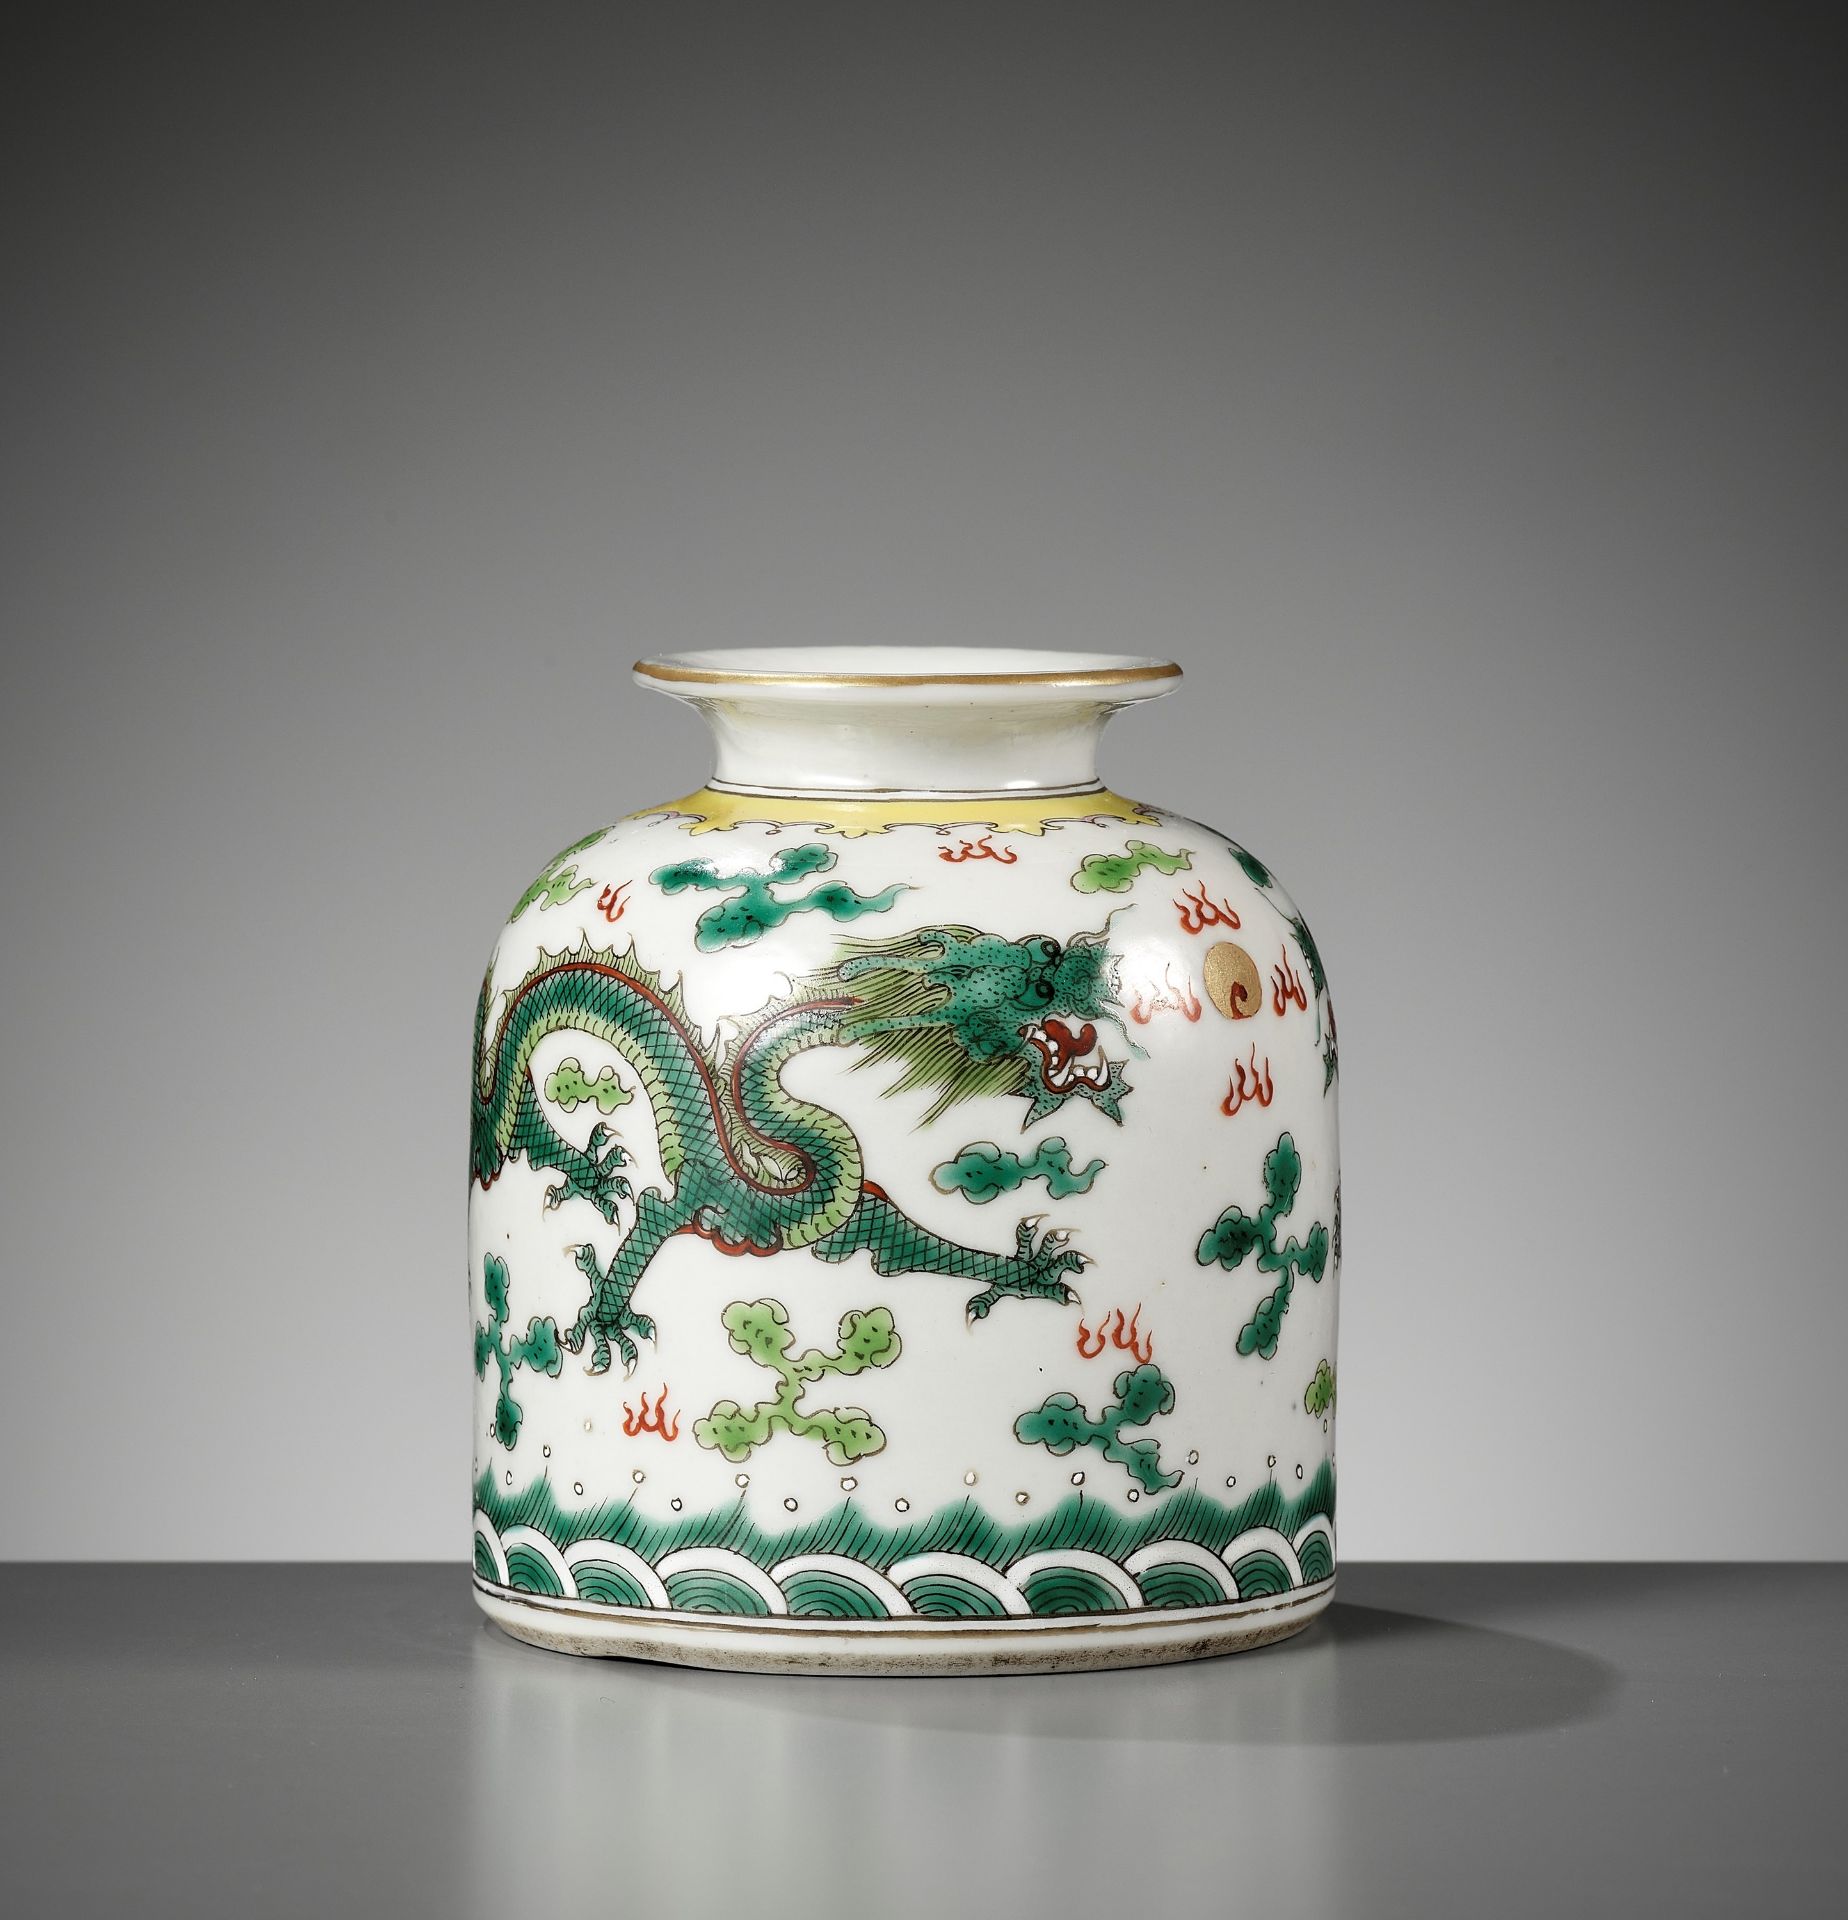 A FAMILLE VERTE 'DRAGON' WATER POT, LATE QING DYNASTY TO EARLY REPUBLIC PERIOD